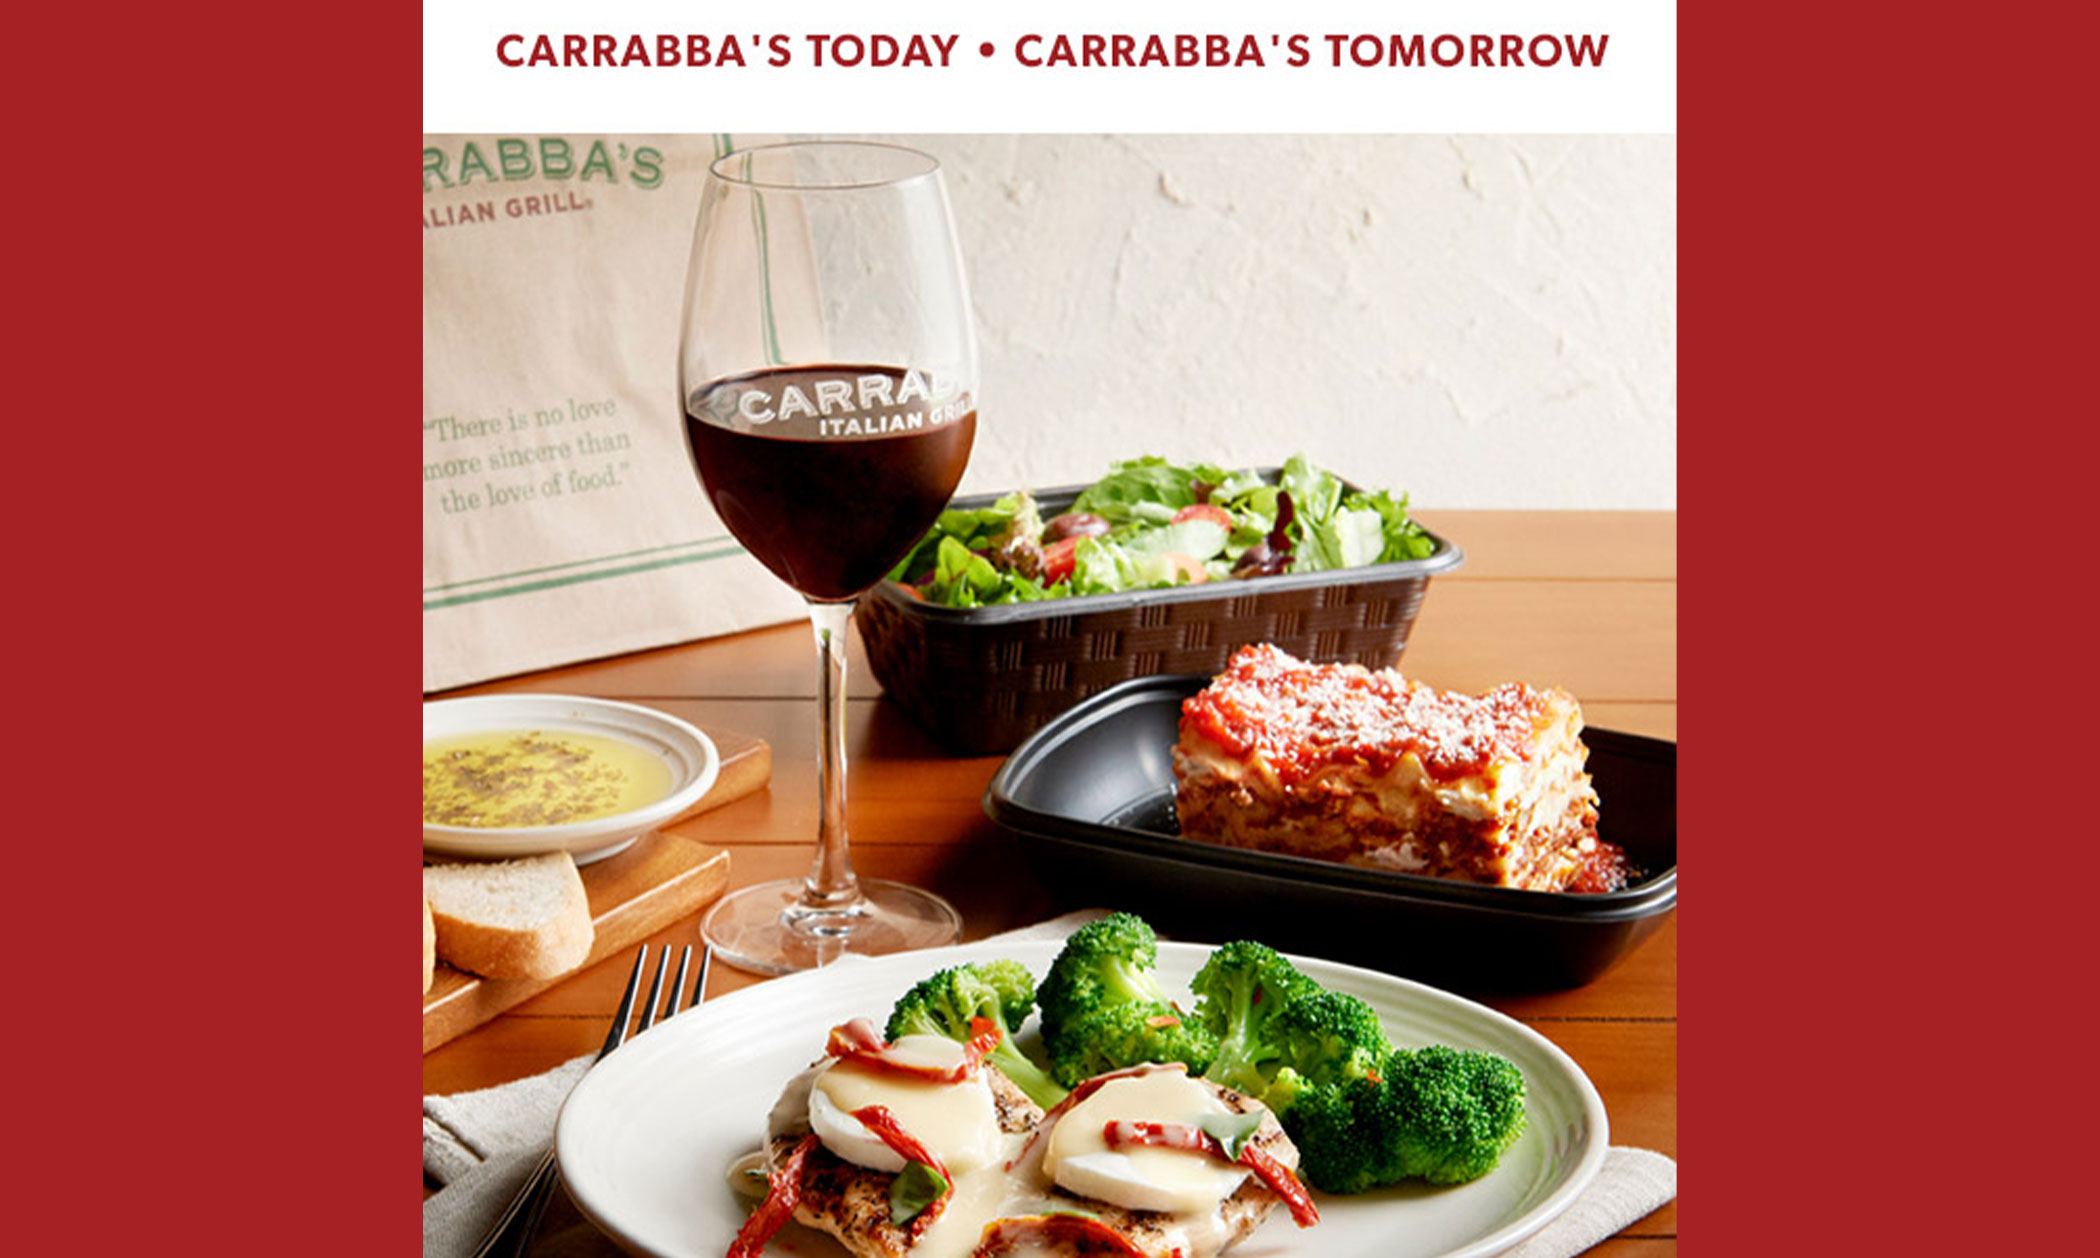 Claim Your FREE TakeHome Lasagna From Carrabba’s! The Savvy Sampler